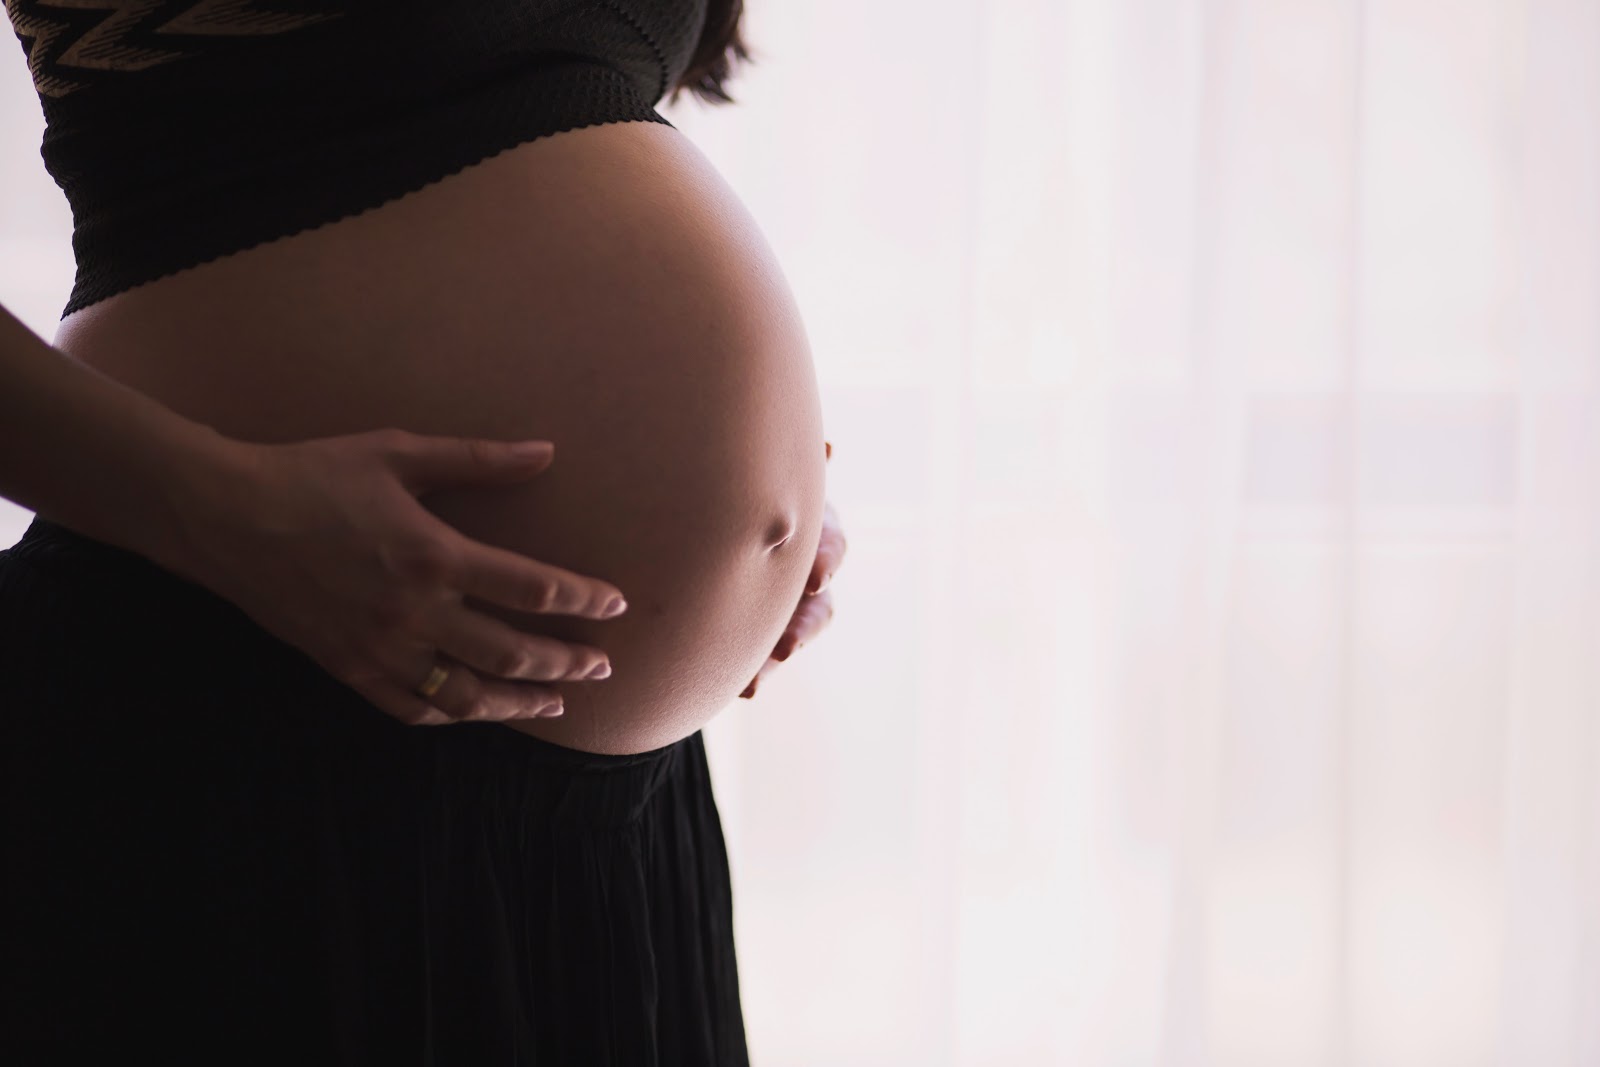 5 reasons you NEED to see a chiro during pregnancy